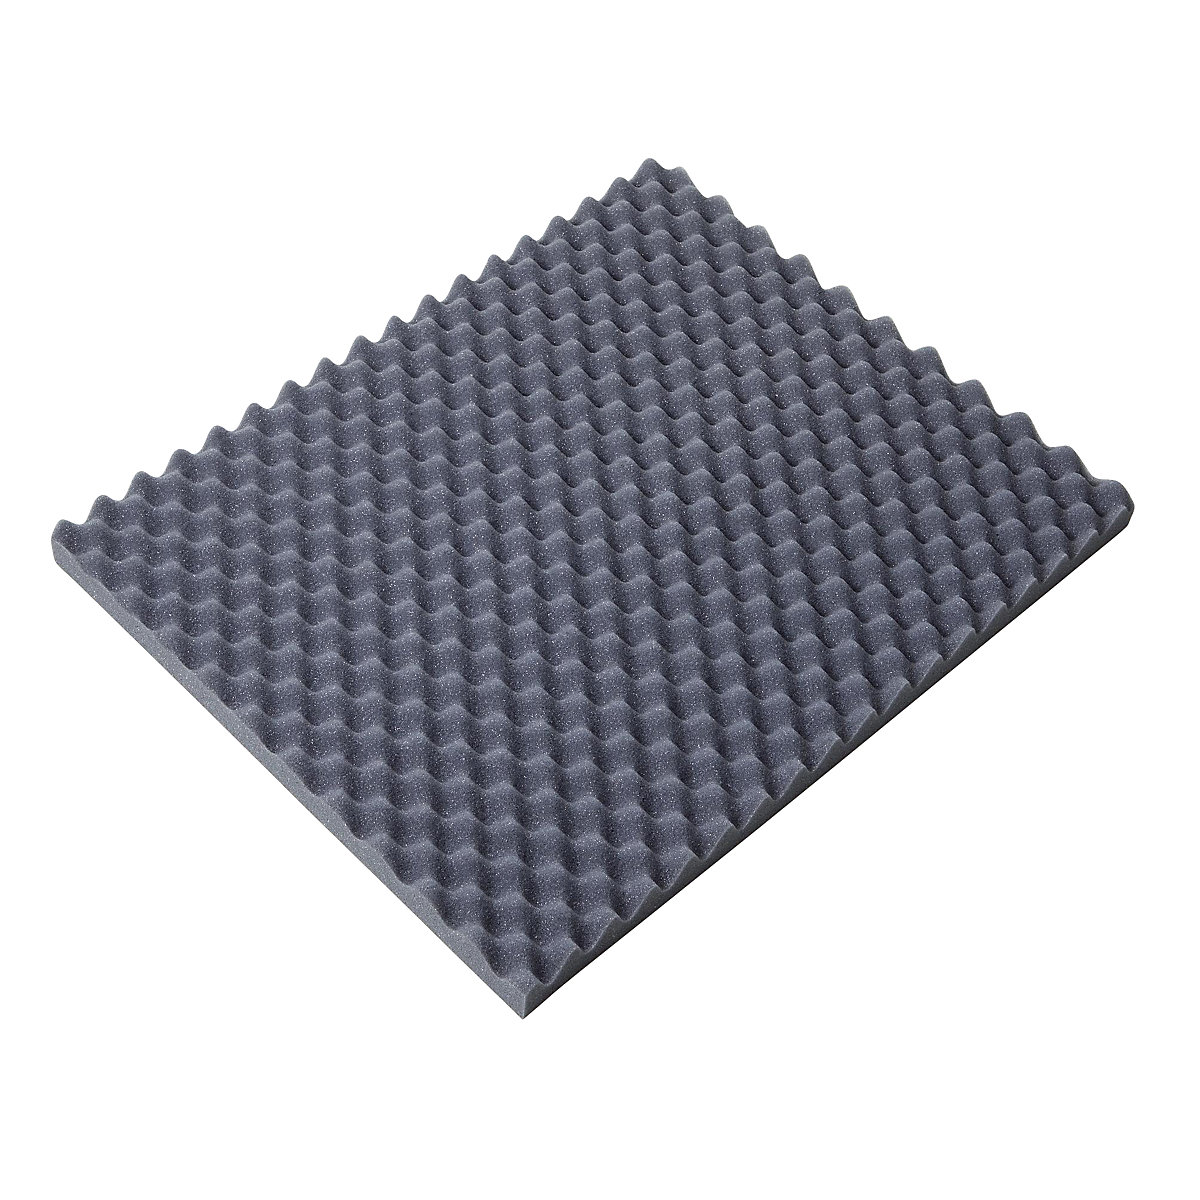 Egg crate foam sheet, 40 mm thick, LxW 500 x 400 mm, pack of 26, 3+ packs-4